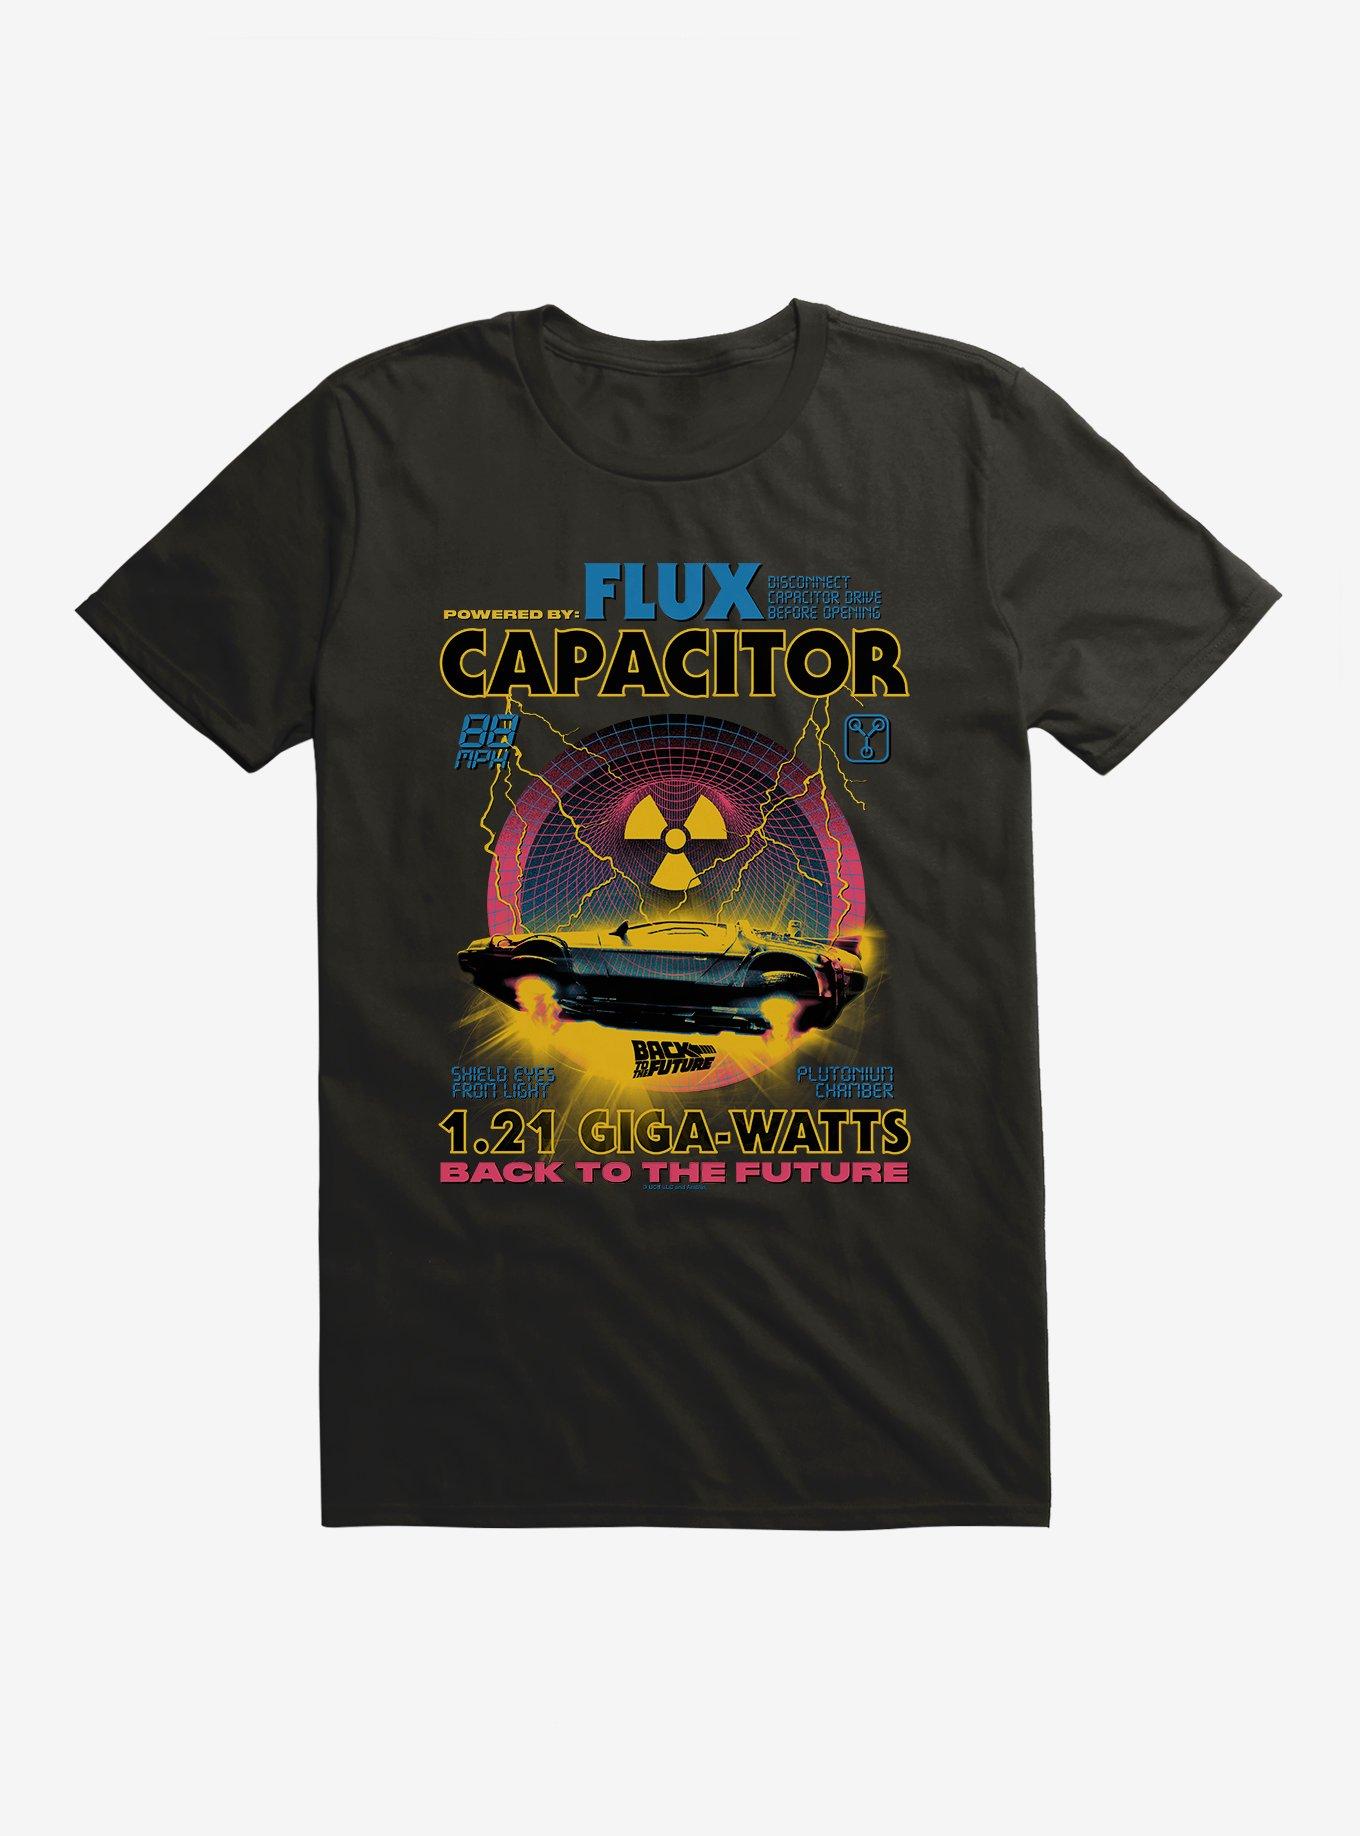 Back To The Future Powered By Flux T-shirt, BLACK, hi-res